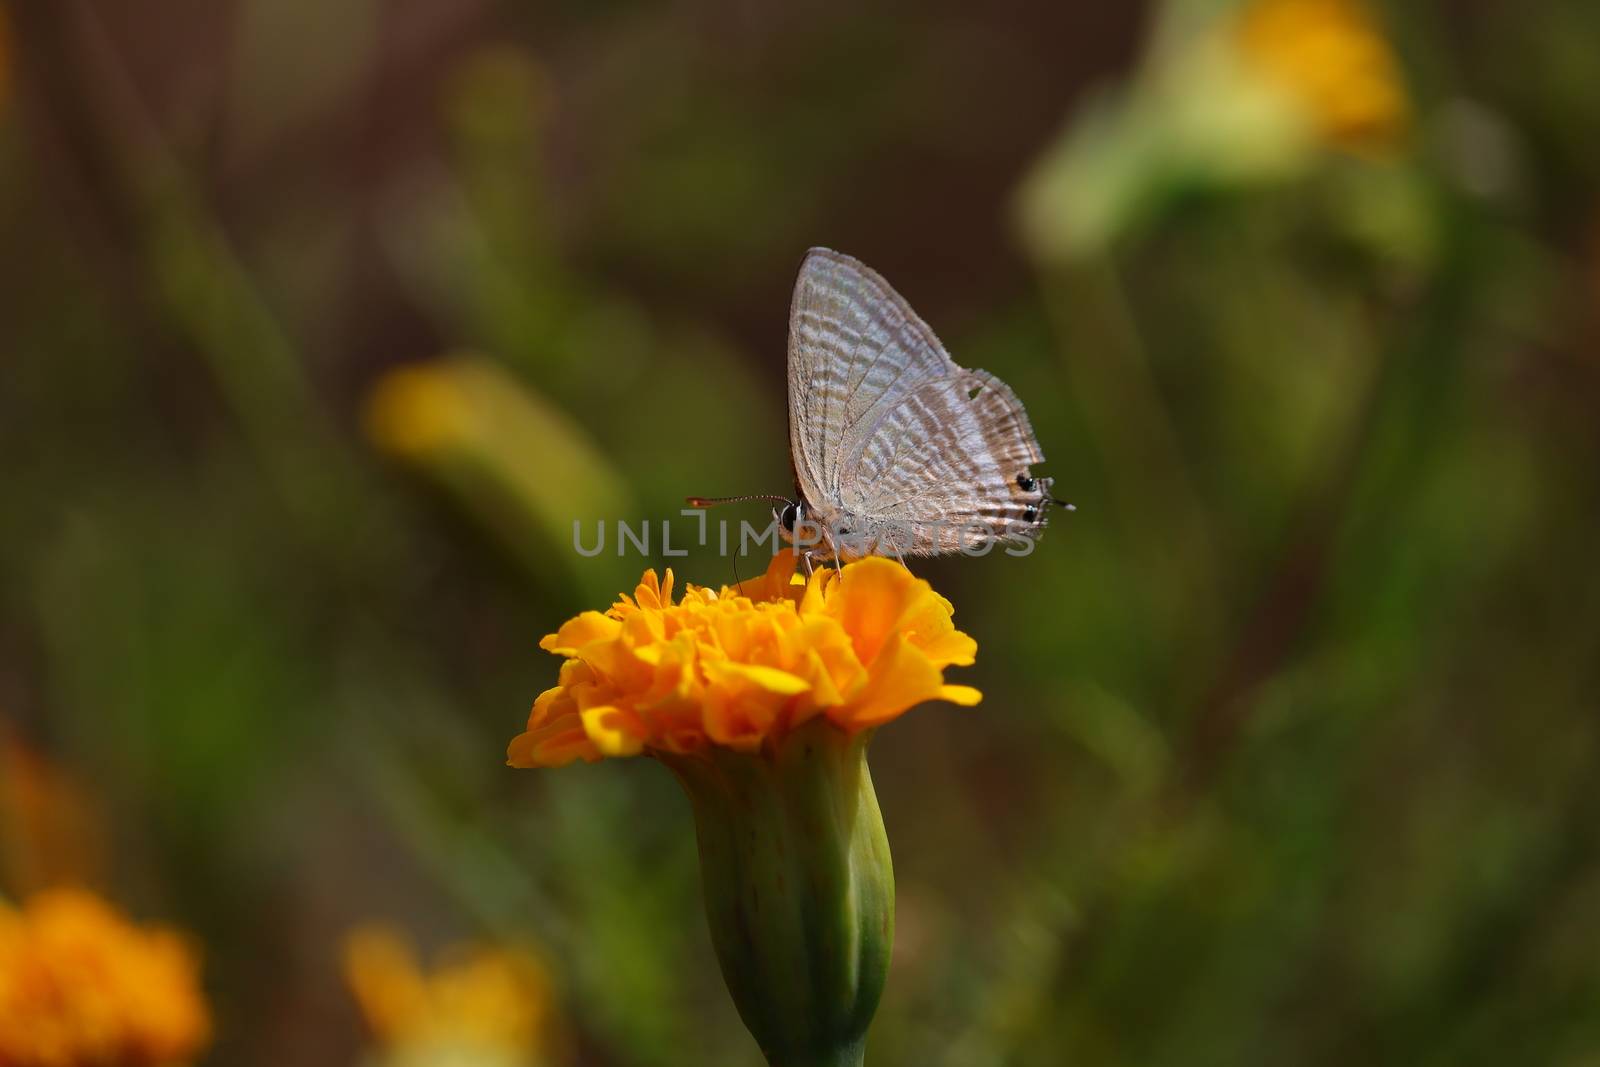 The Blues (Family Lycaenidae) butterfly on the yellow marigold